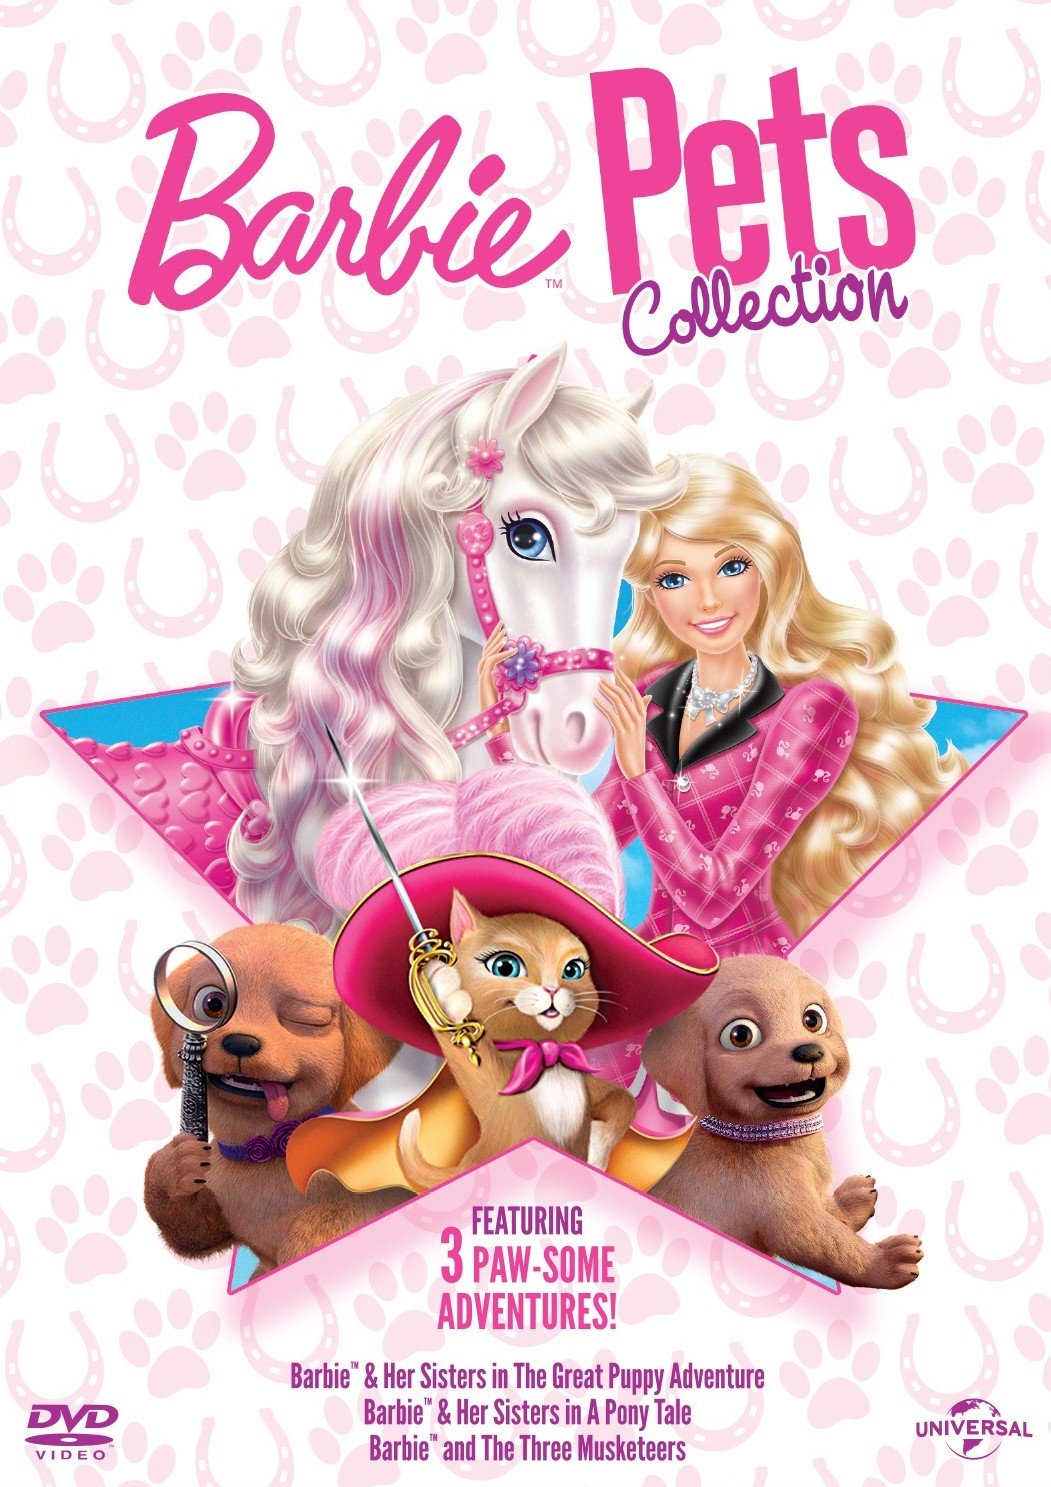 barbie-pets-collection-barbie-her-sisters-in-the-great-puppy-adventure-barbie-her-sisters-in-a-pony-tale-barbie-and-the-three-musketeers